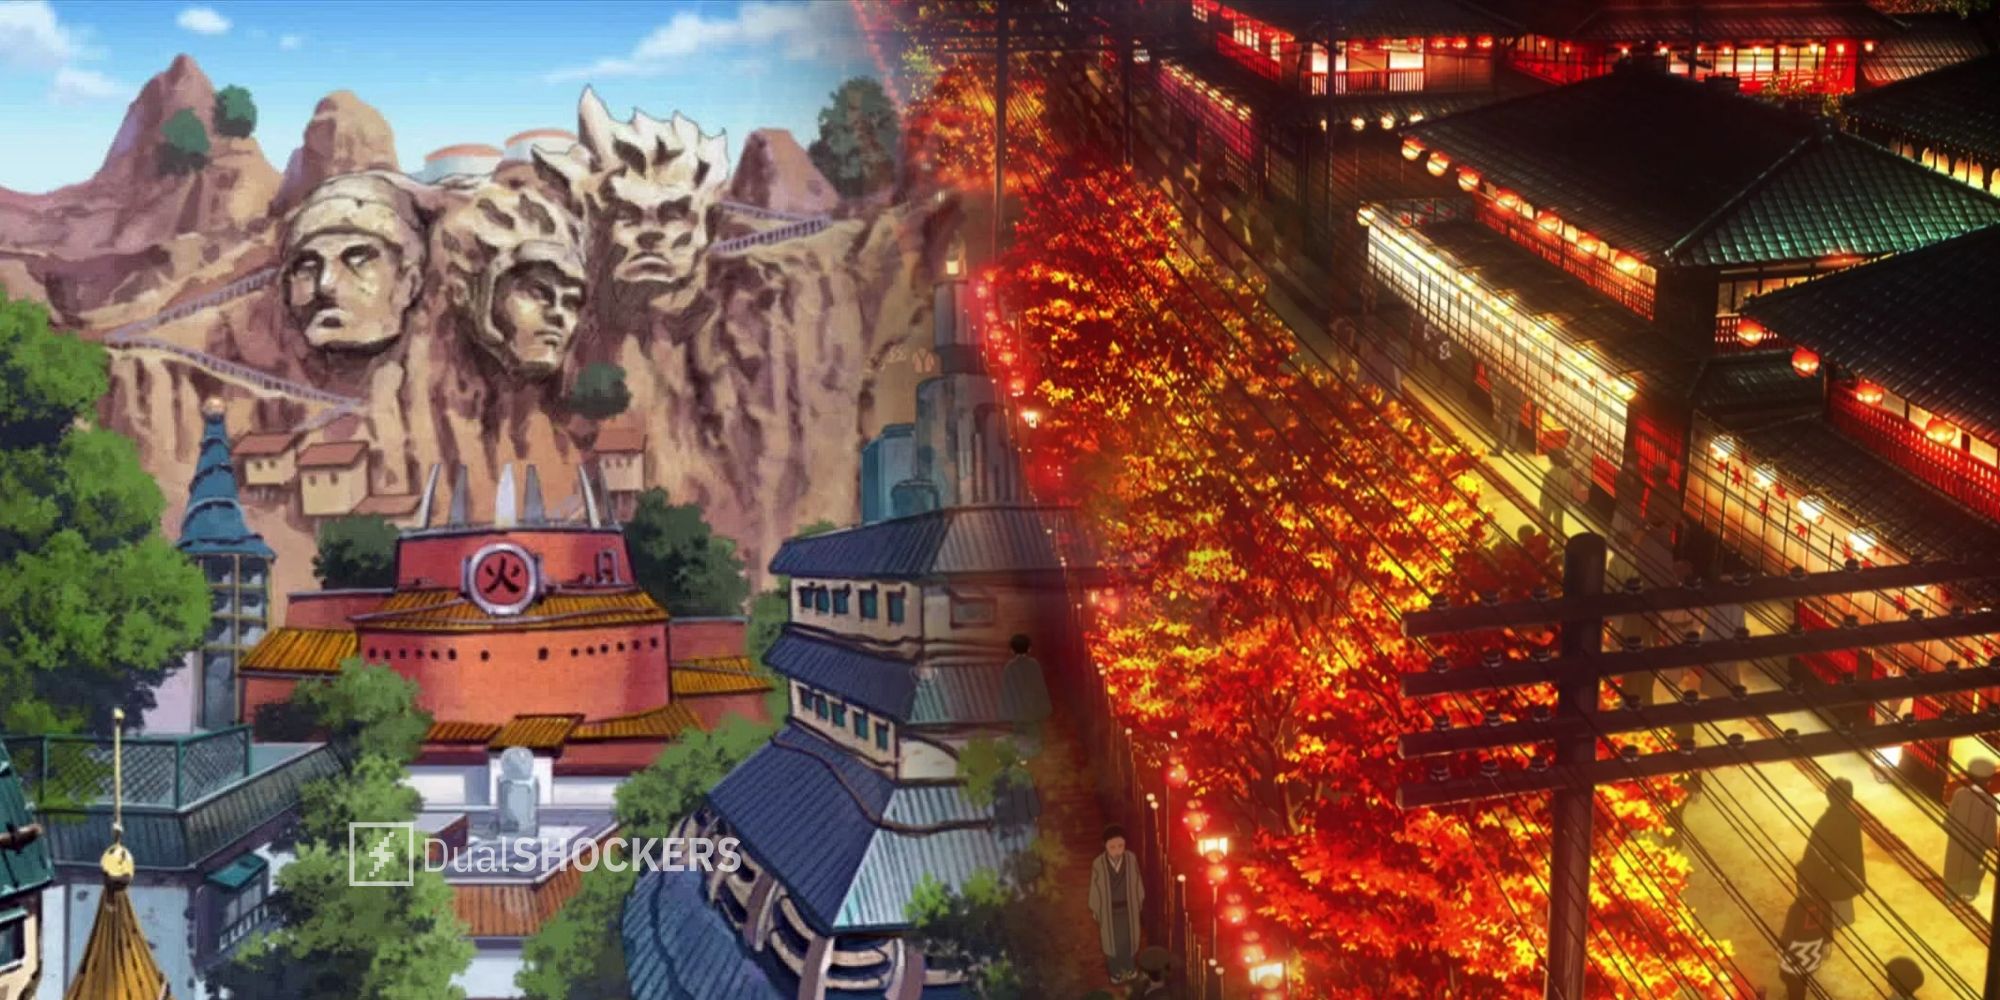 5 amazing places in Japan every anime lover must visit